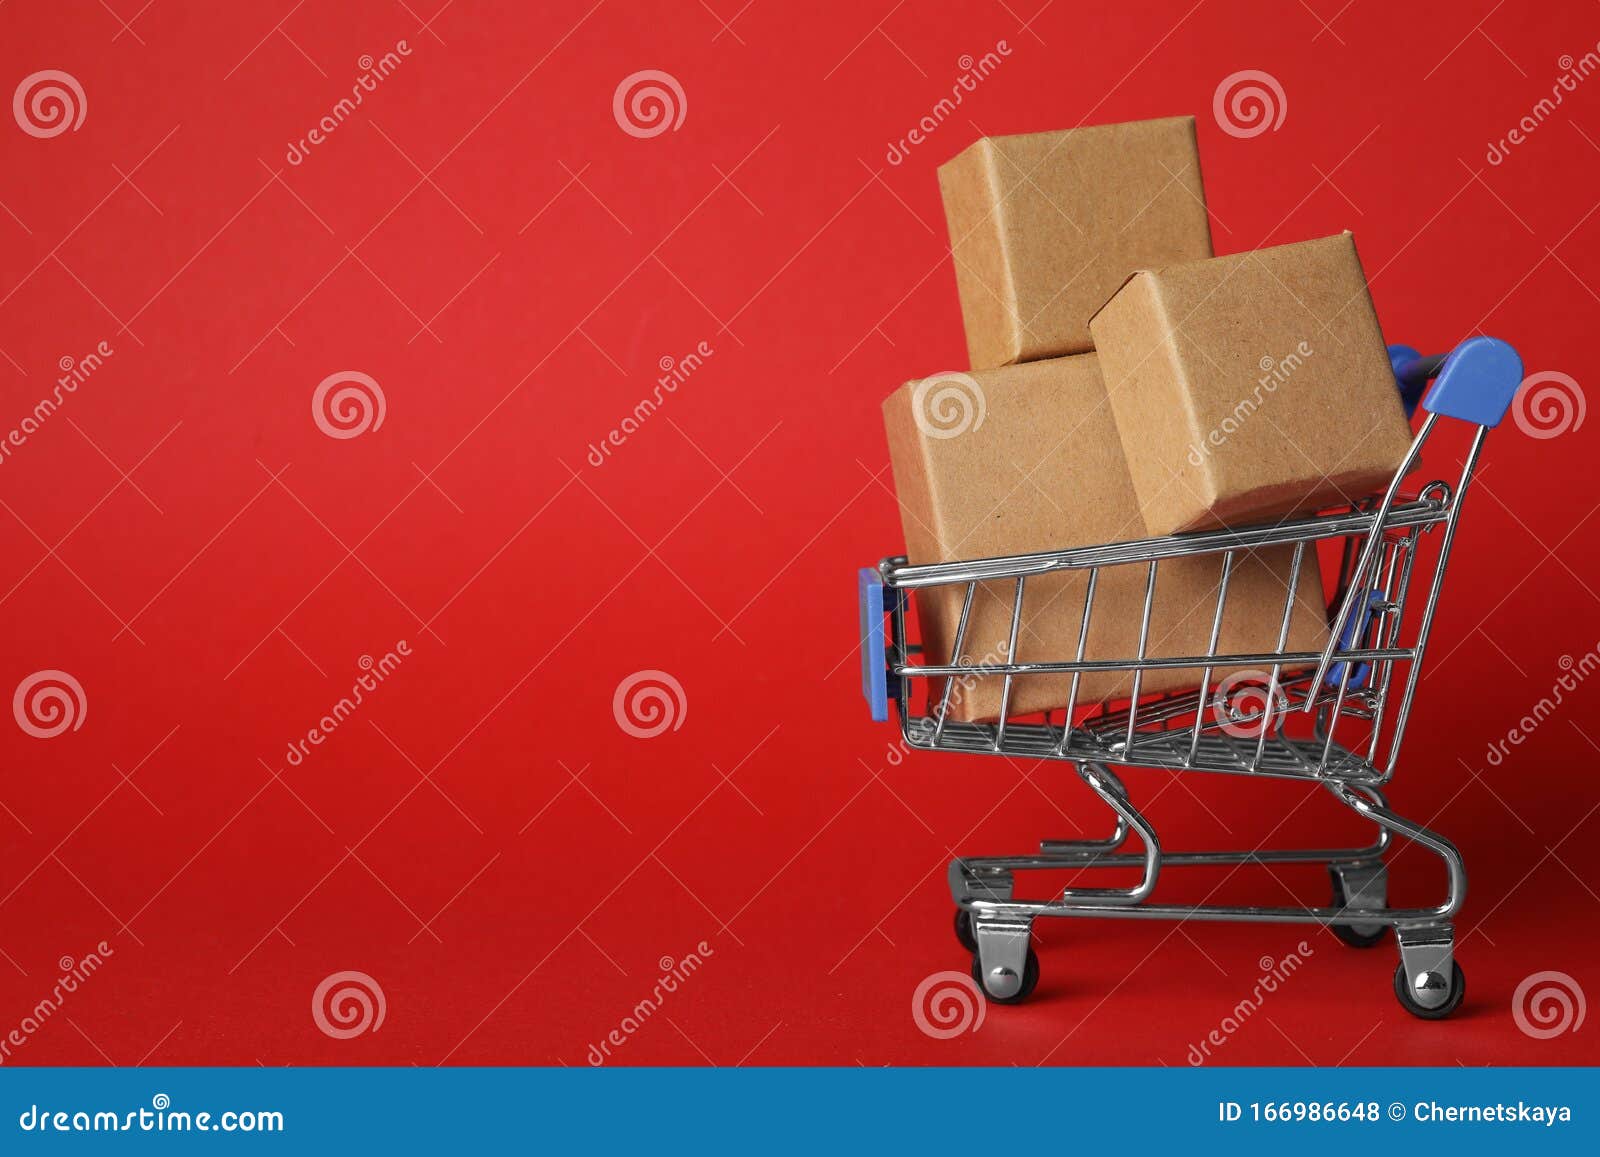 shopping cart with boxes on red background. logistics and wholesale concept